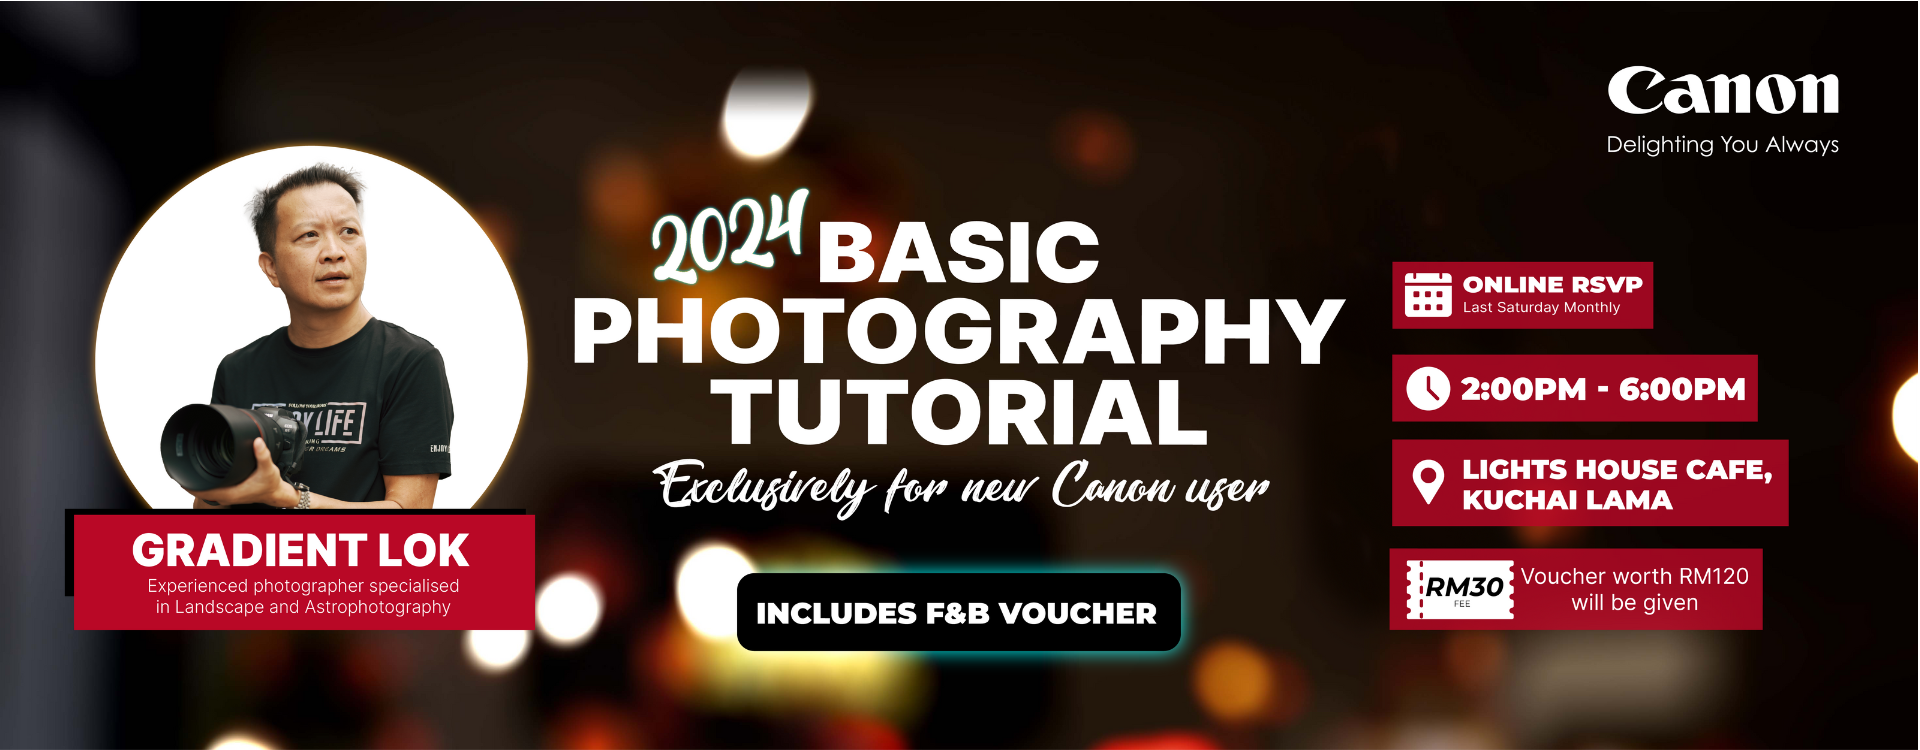 2024_Basic Photography by Gradient Lok - 1920 x 750 px.png